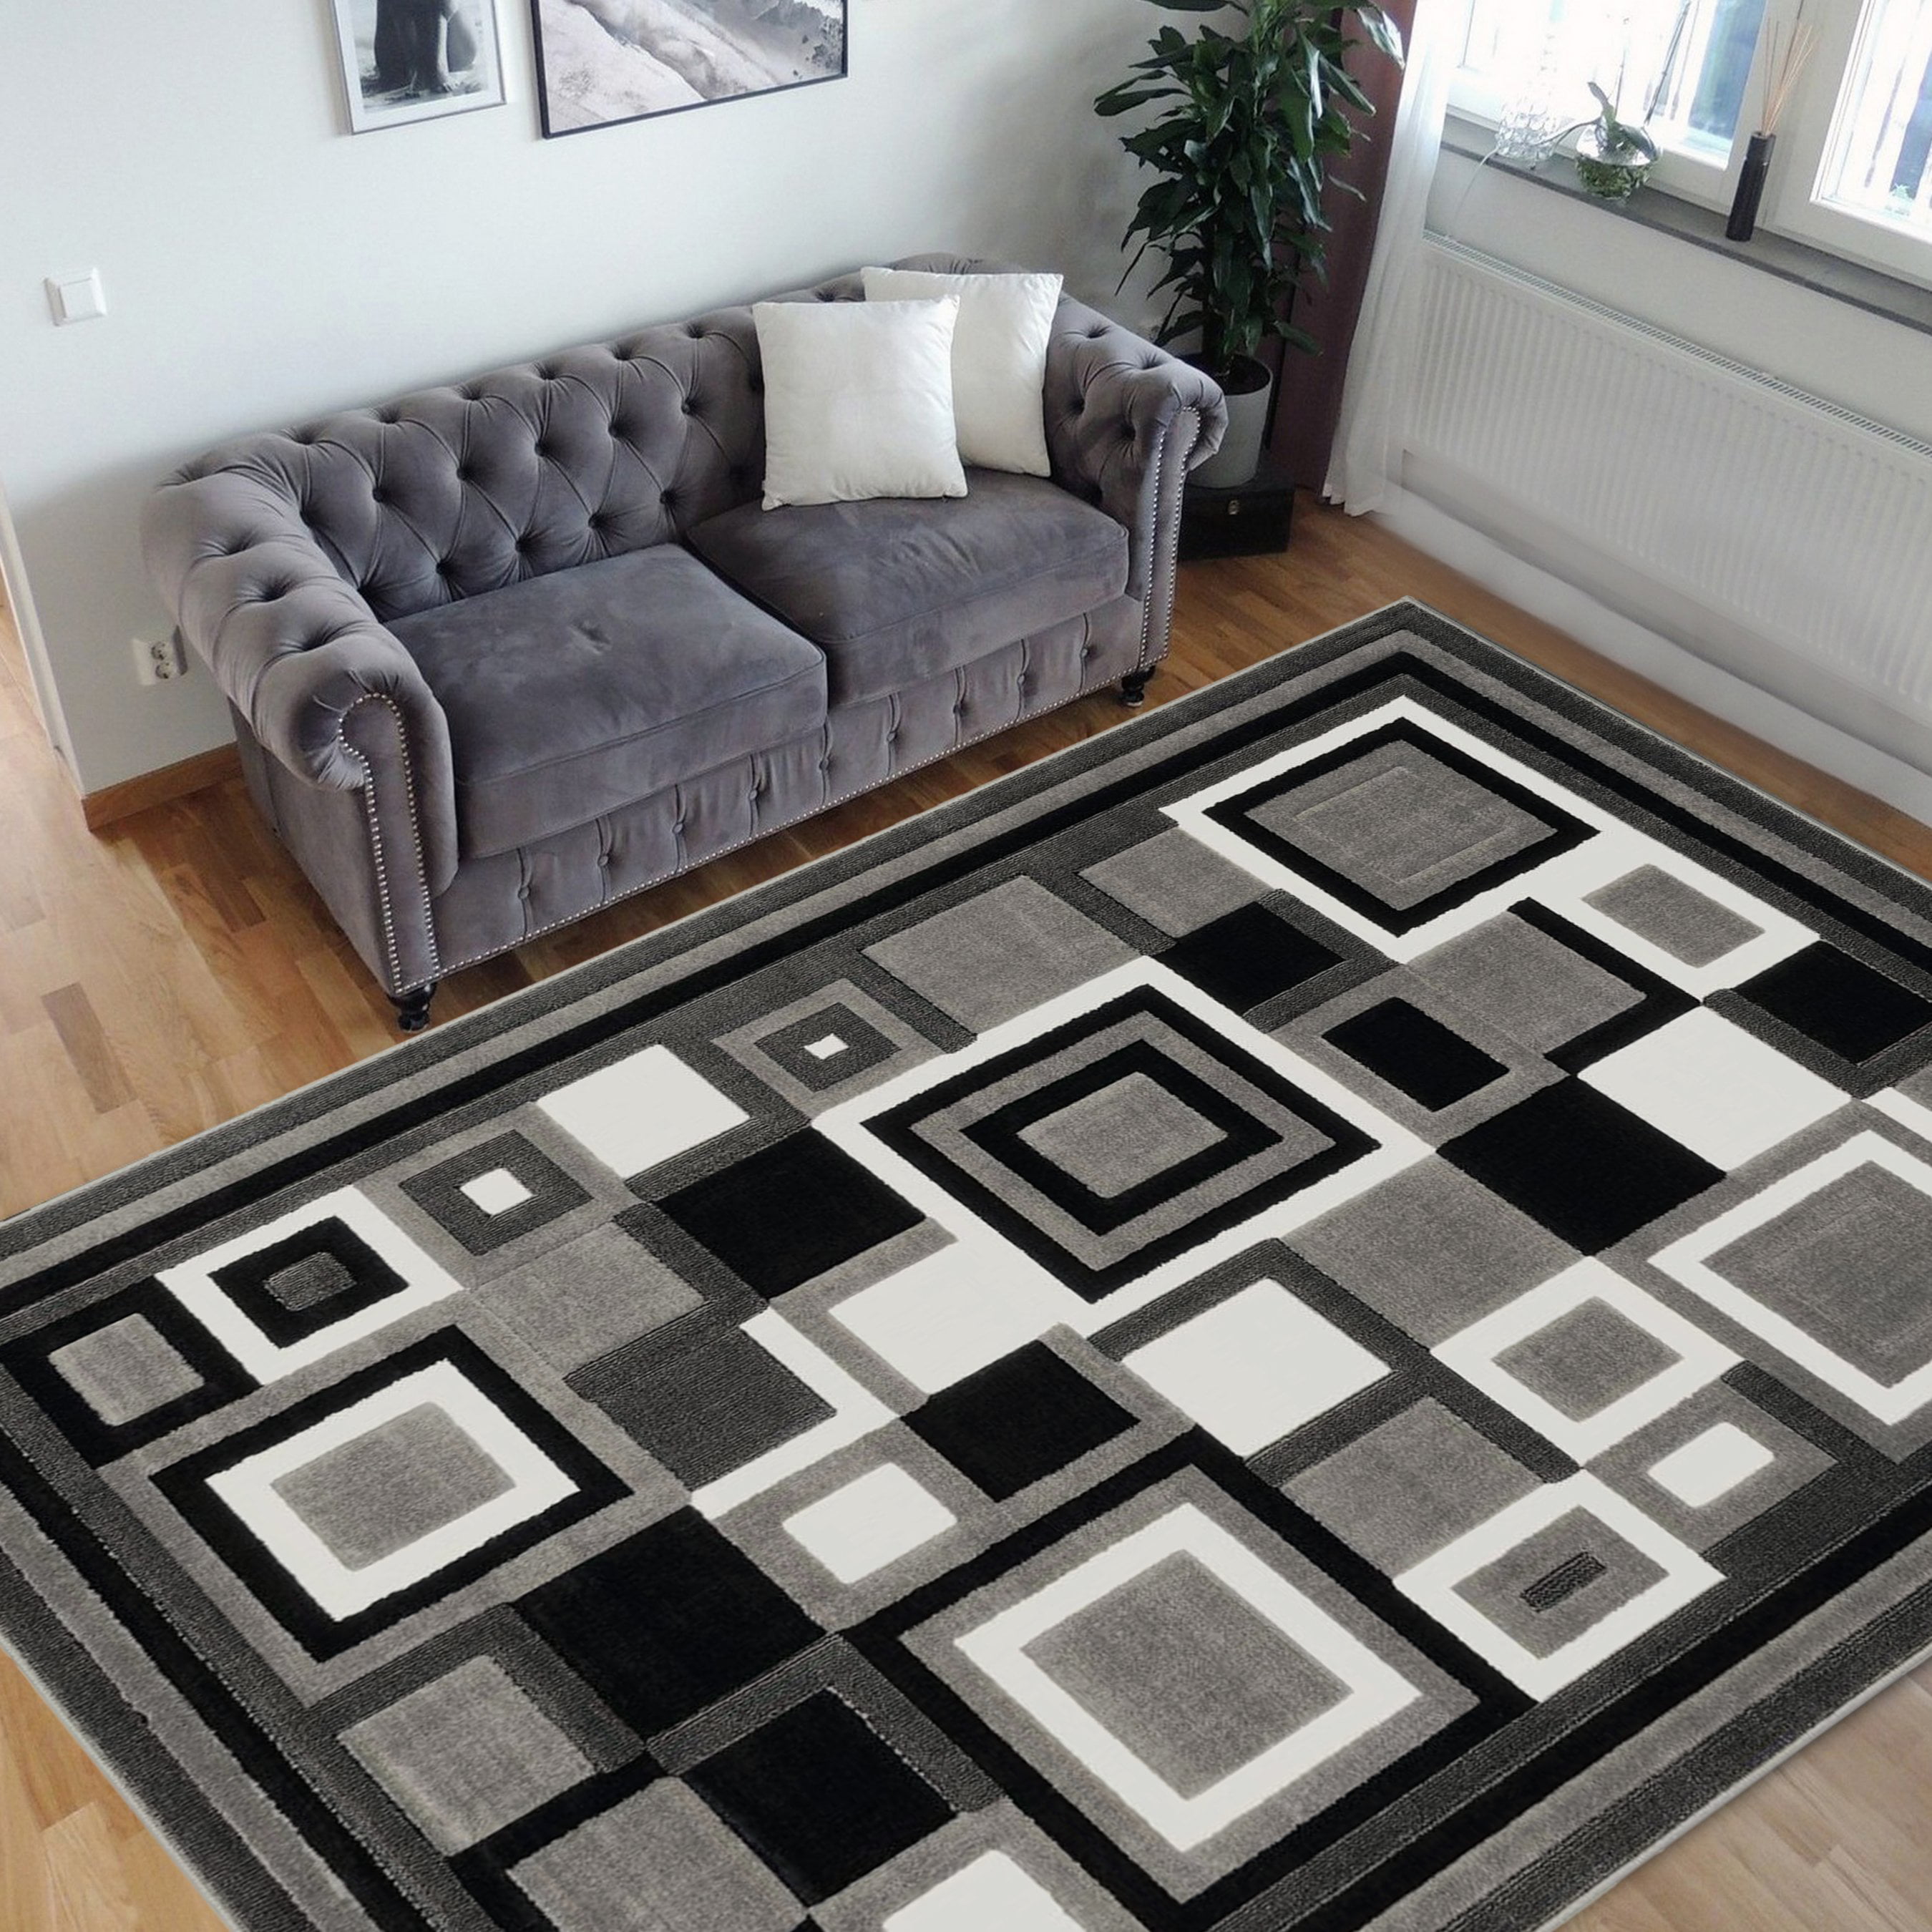 Bedroom Rugs Black White Grey Abstract Carpet Modern Soft Touch Short Pile Mats 